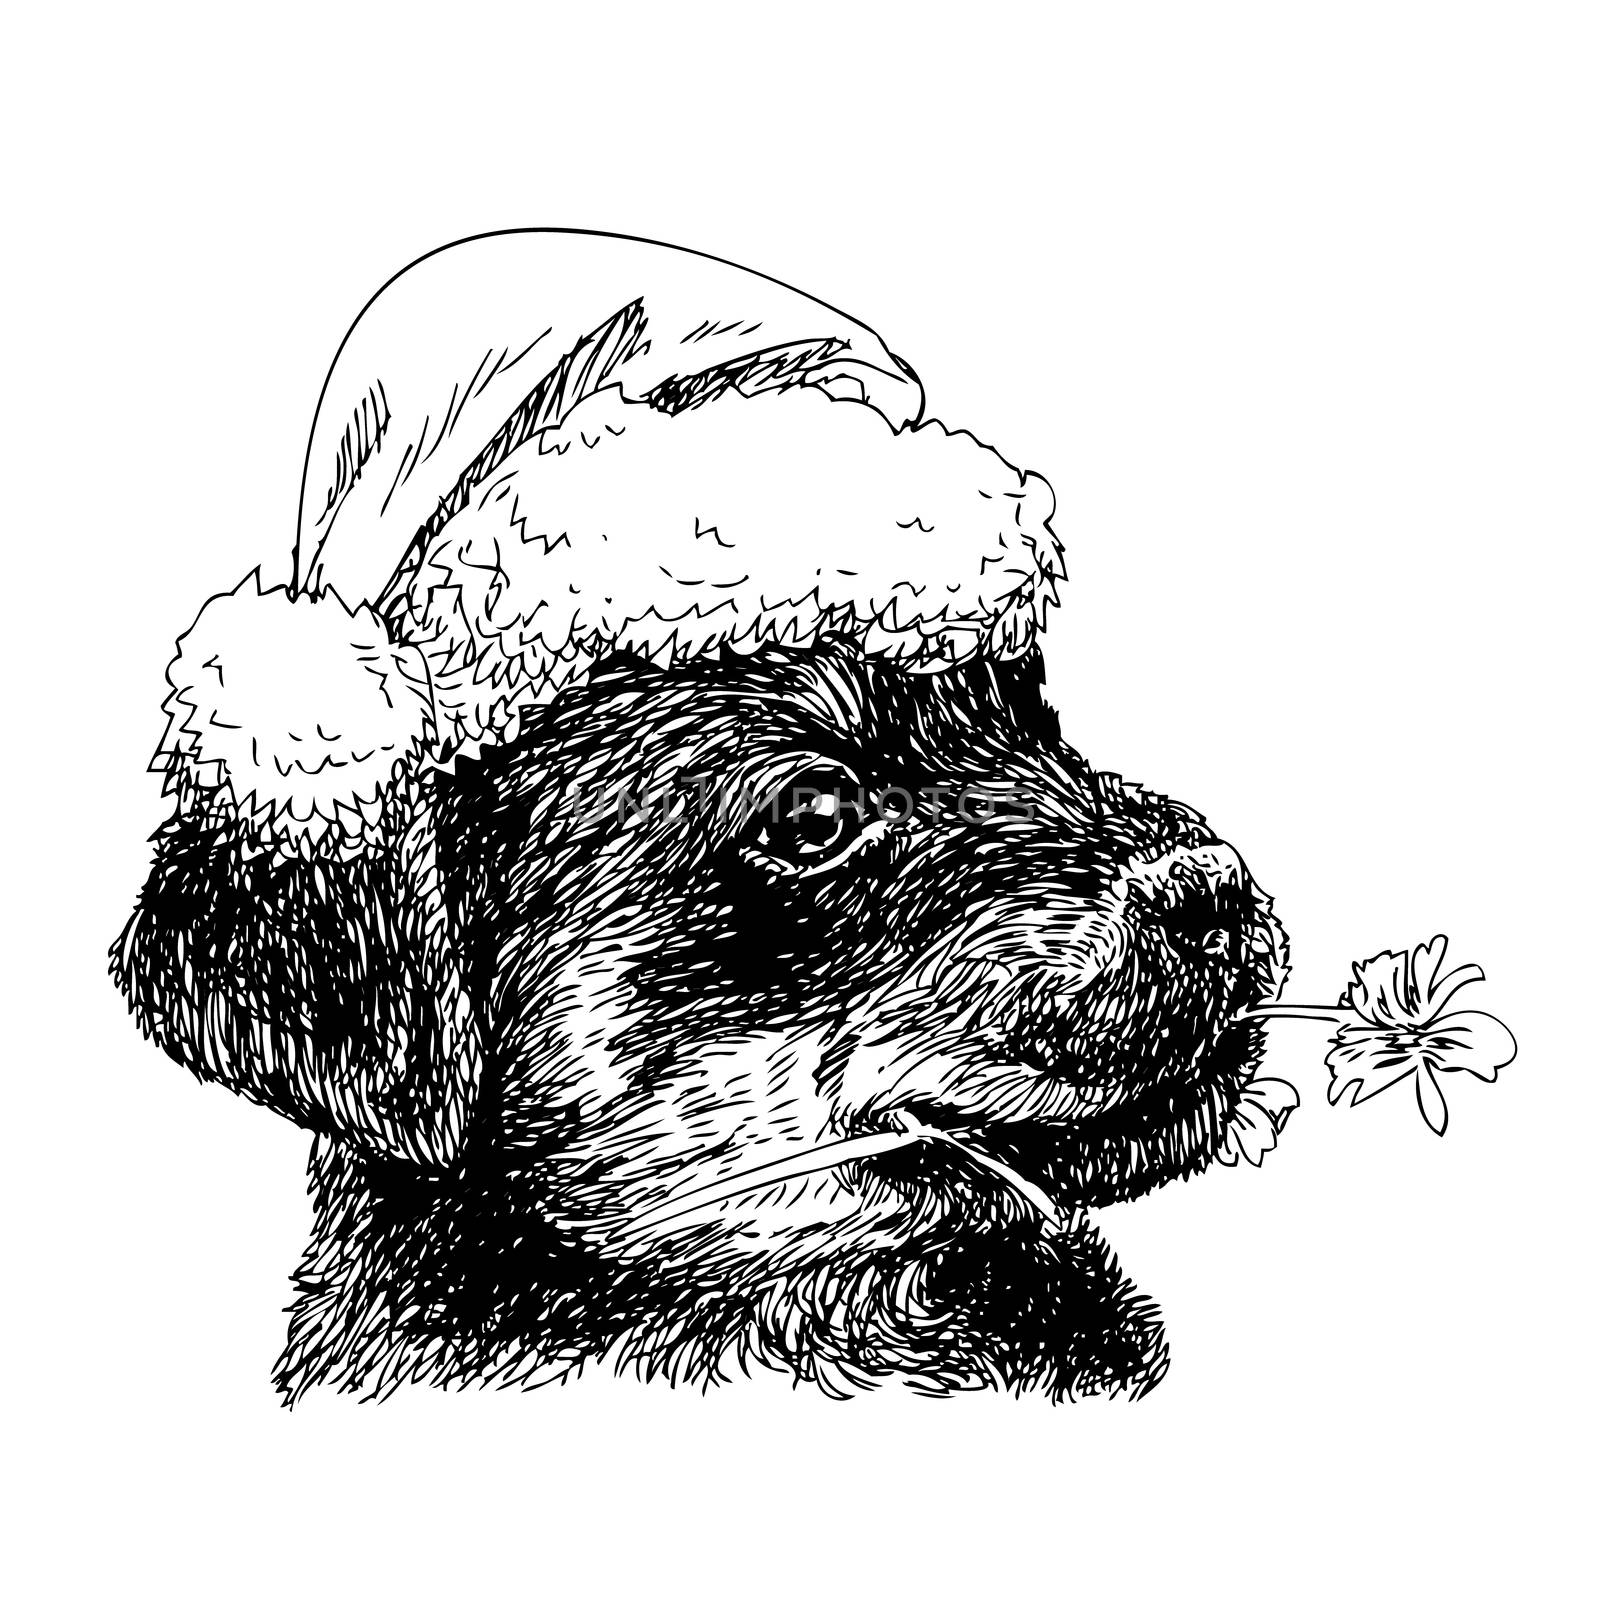 Rottweiler with santa claus hat by simpleBE